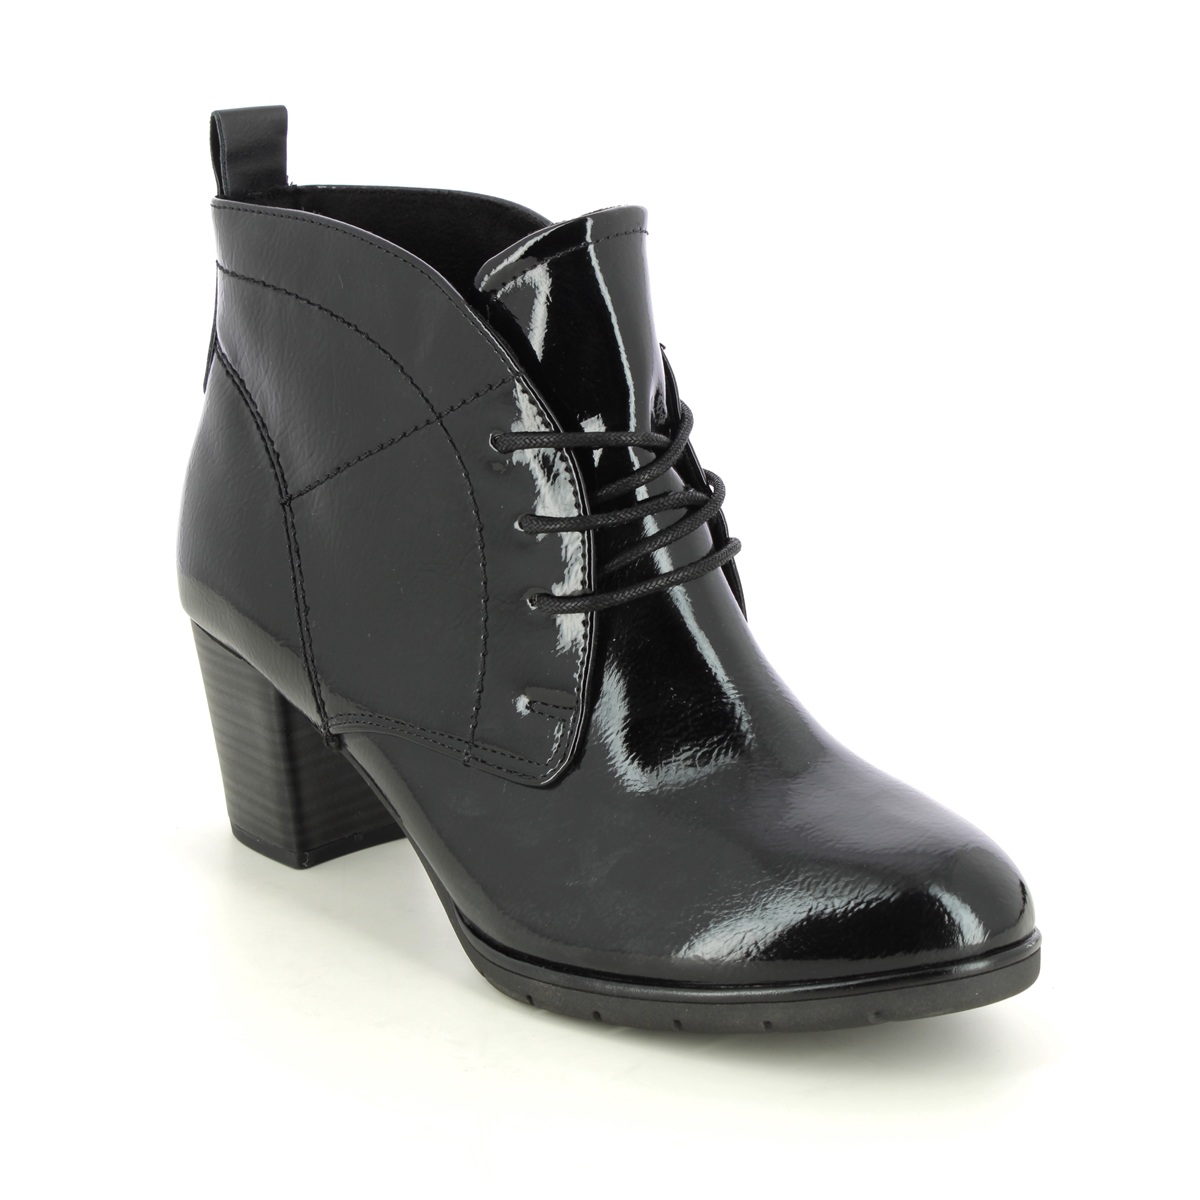 Marco Tozzi Pepalow Black Patent Womens Heeled Boots 25109-41-018 In Size 39 In Plain Black Patent